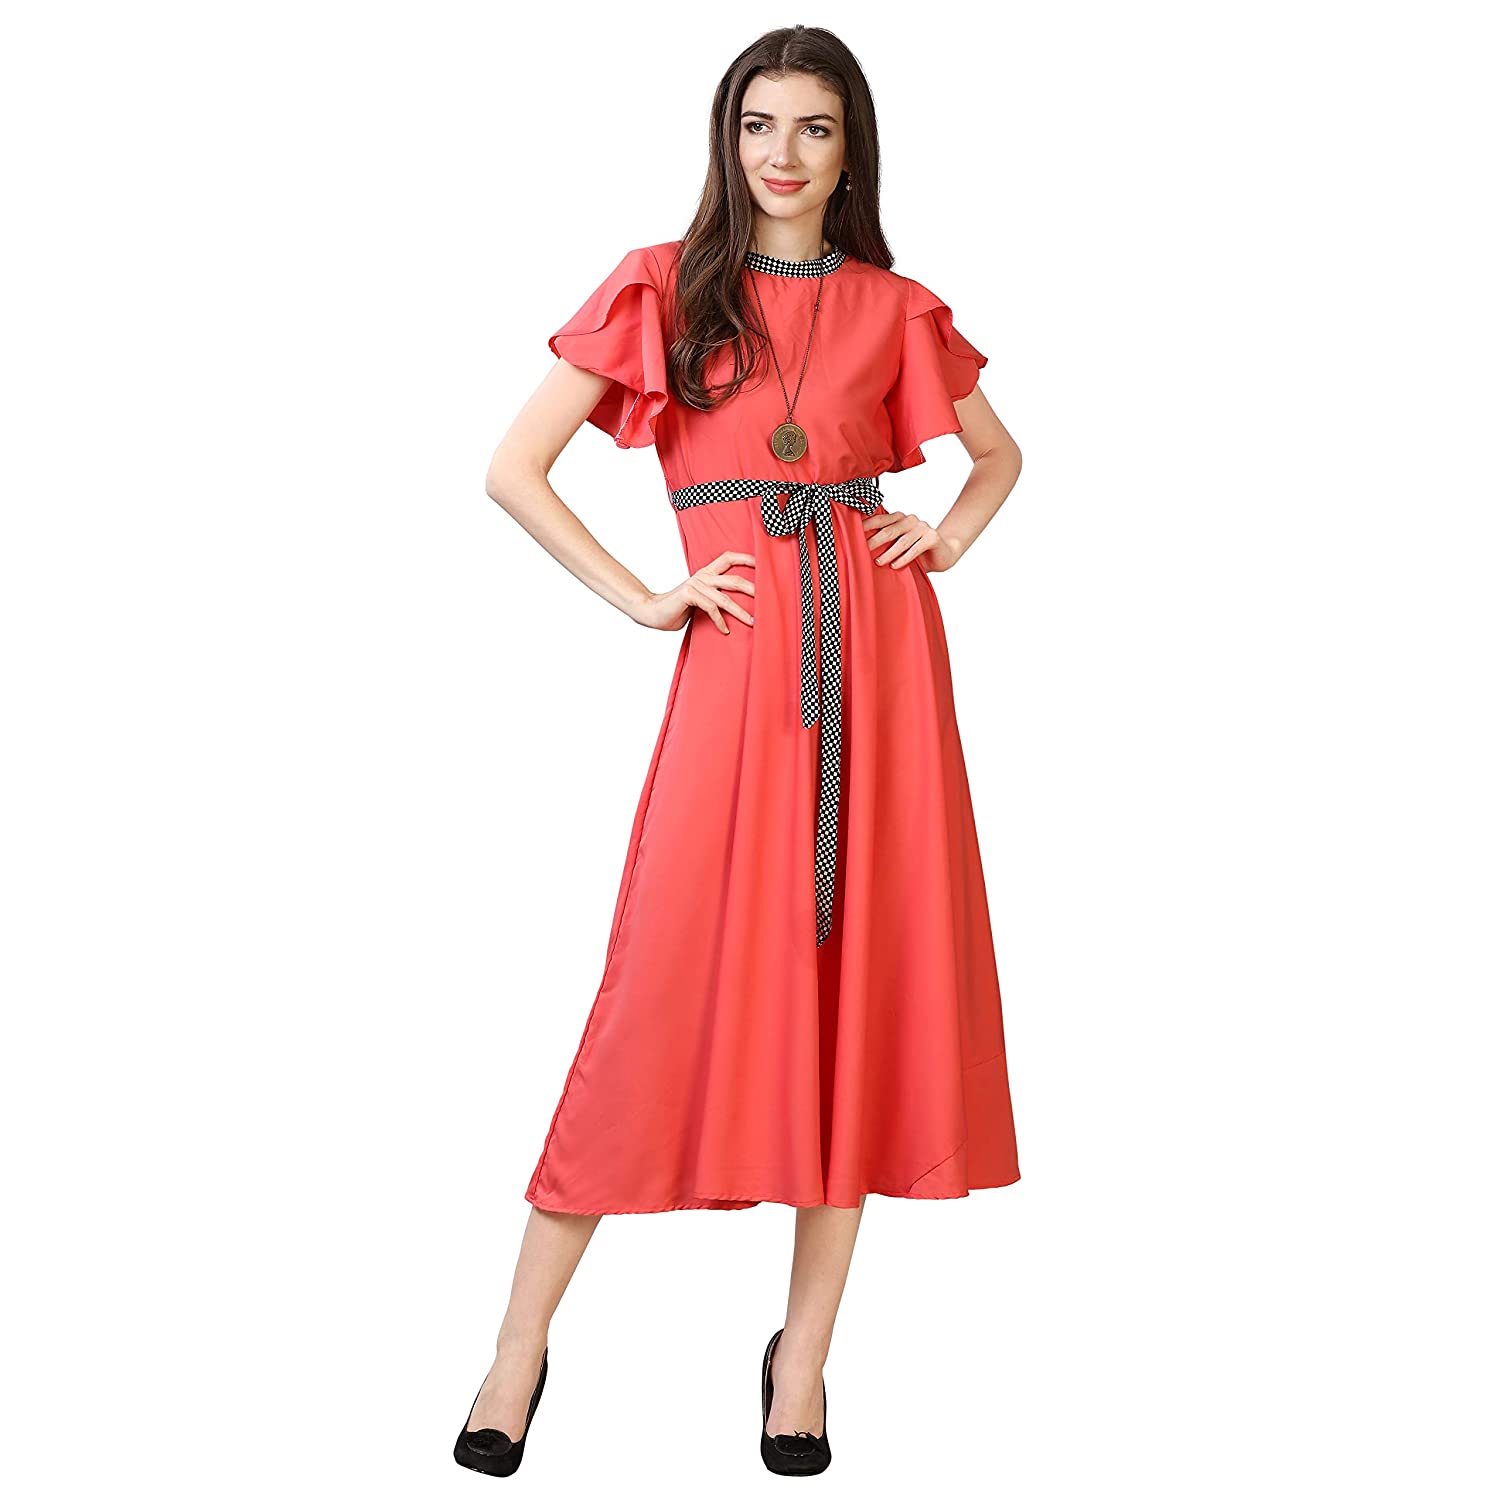 OOMPH! Women's Crepe A-Line Maxi Dress -  DRESSES in Sri Lanka from Arcade Online Shopping - Just Rs. 4699!